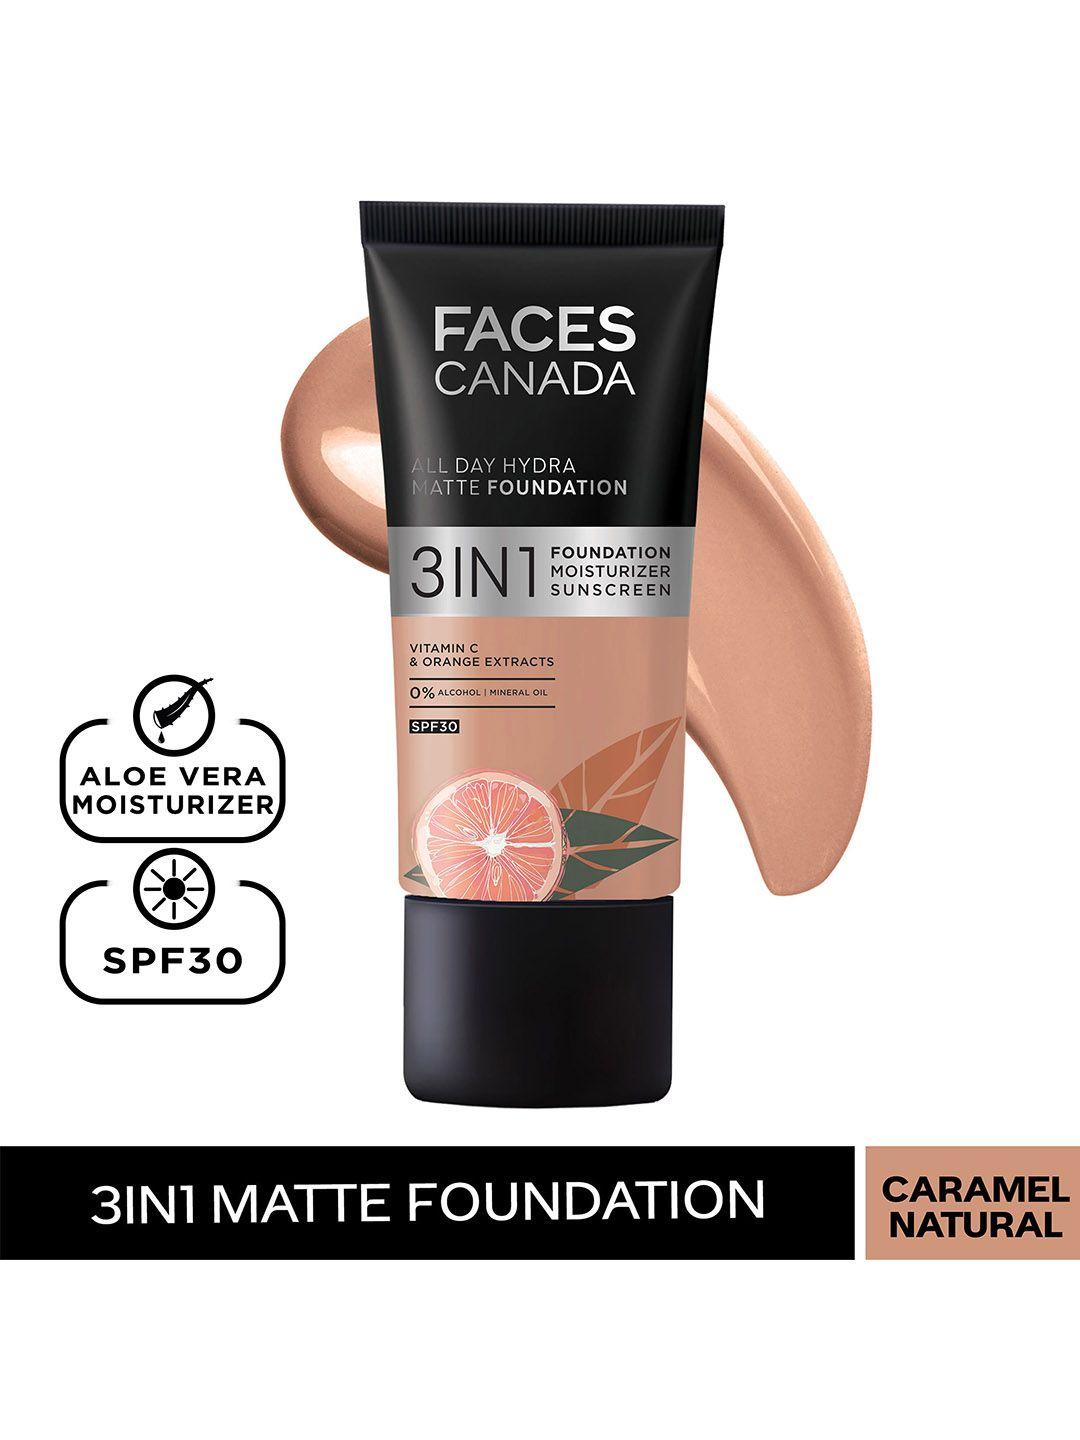 faces canada 3-in-1 all day hydra matte spf30 foundation 25ml - caramel natural 023